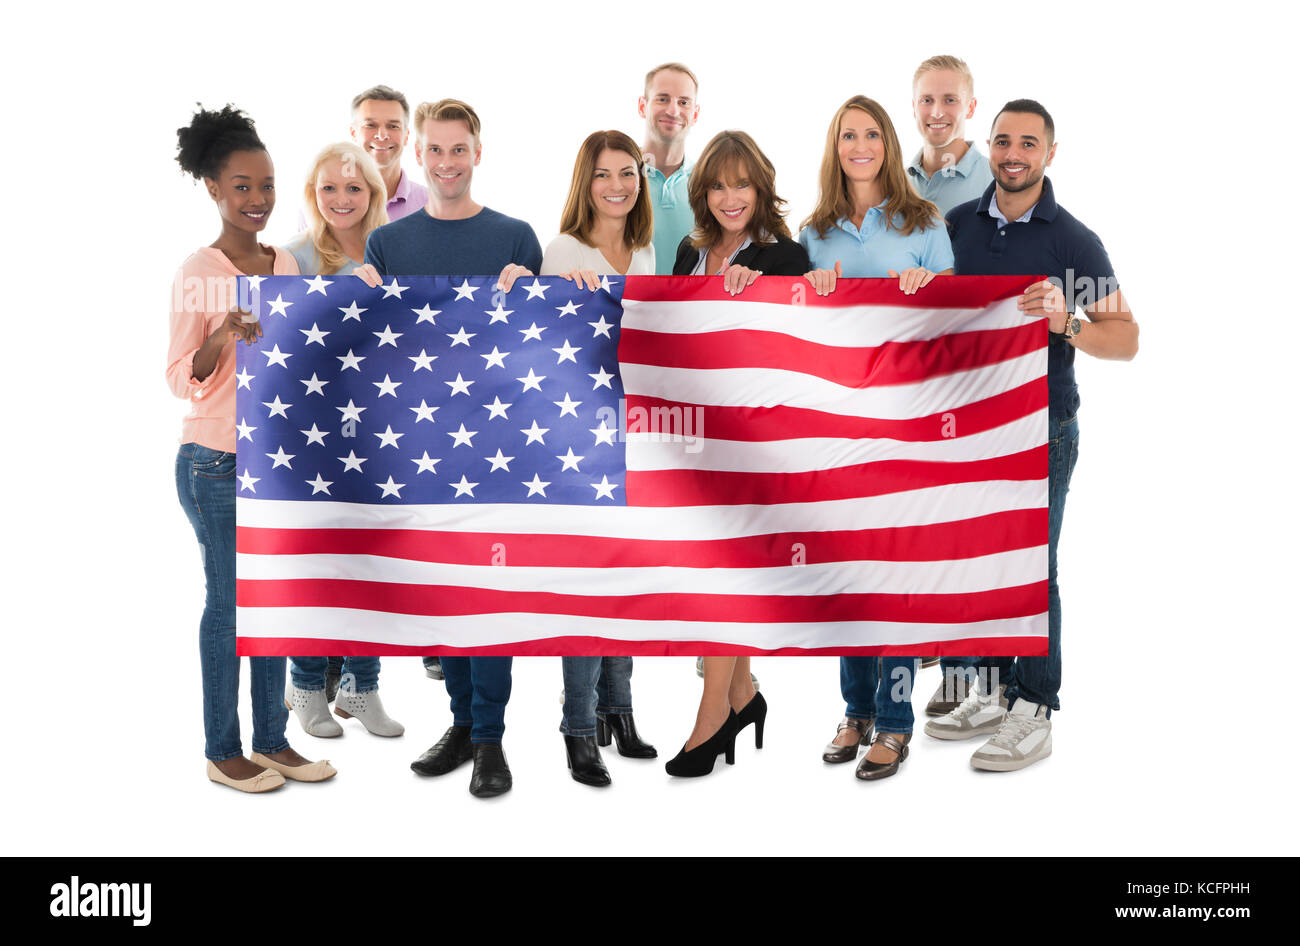 Multiethnic People Holding American Flag Against White Background Stock Photo